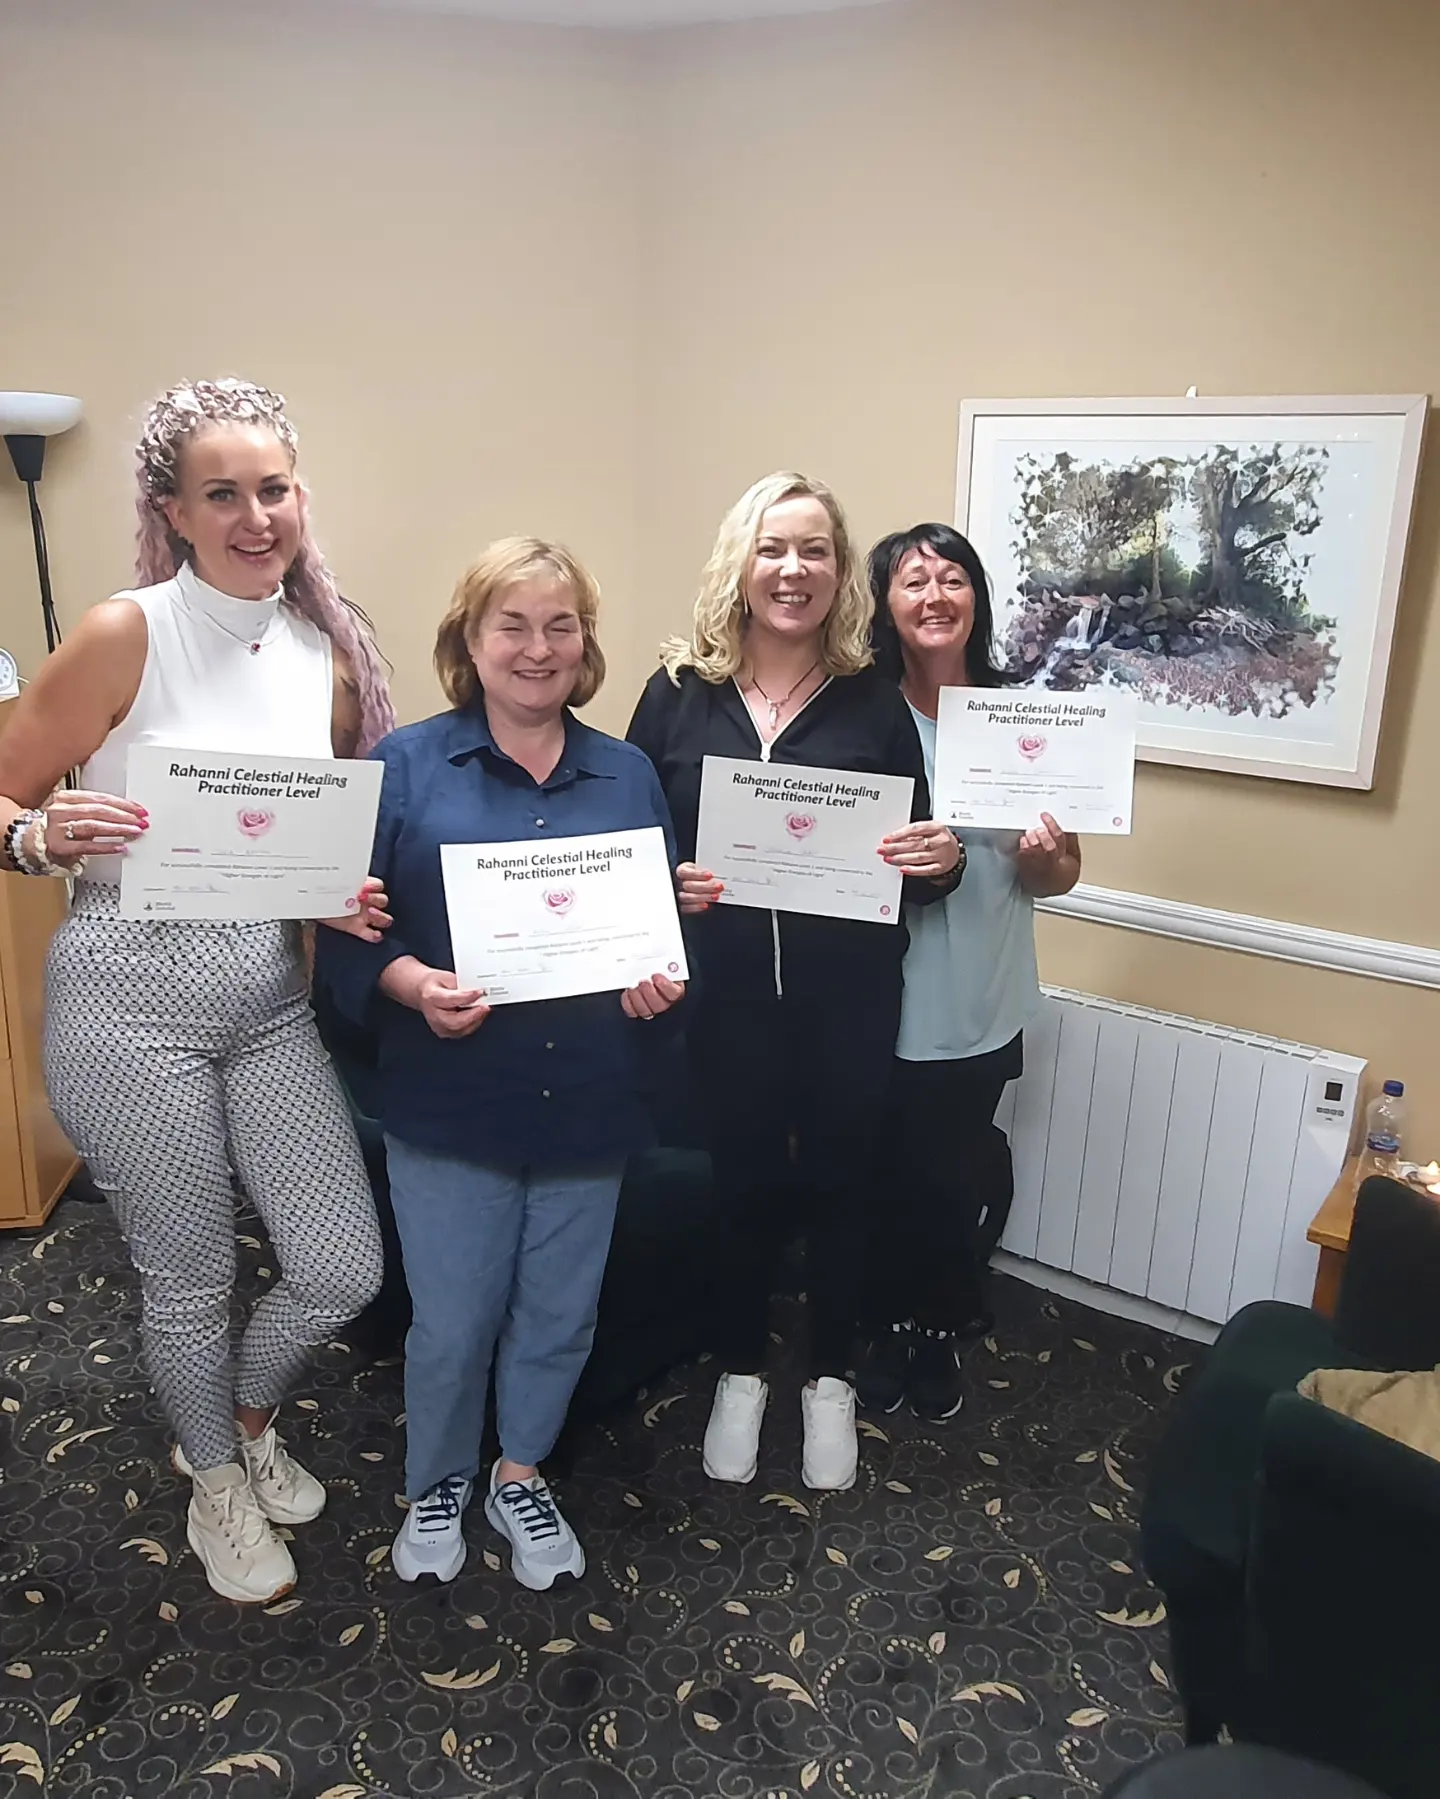 Graduates of Rahanni Celestial Healing Level 1 Workshop in Dublin with Certificates